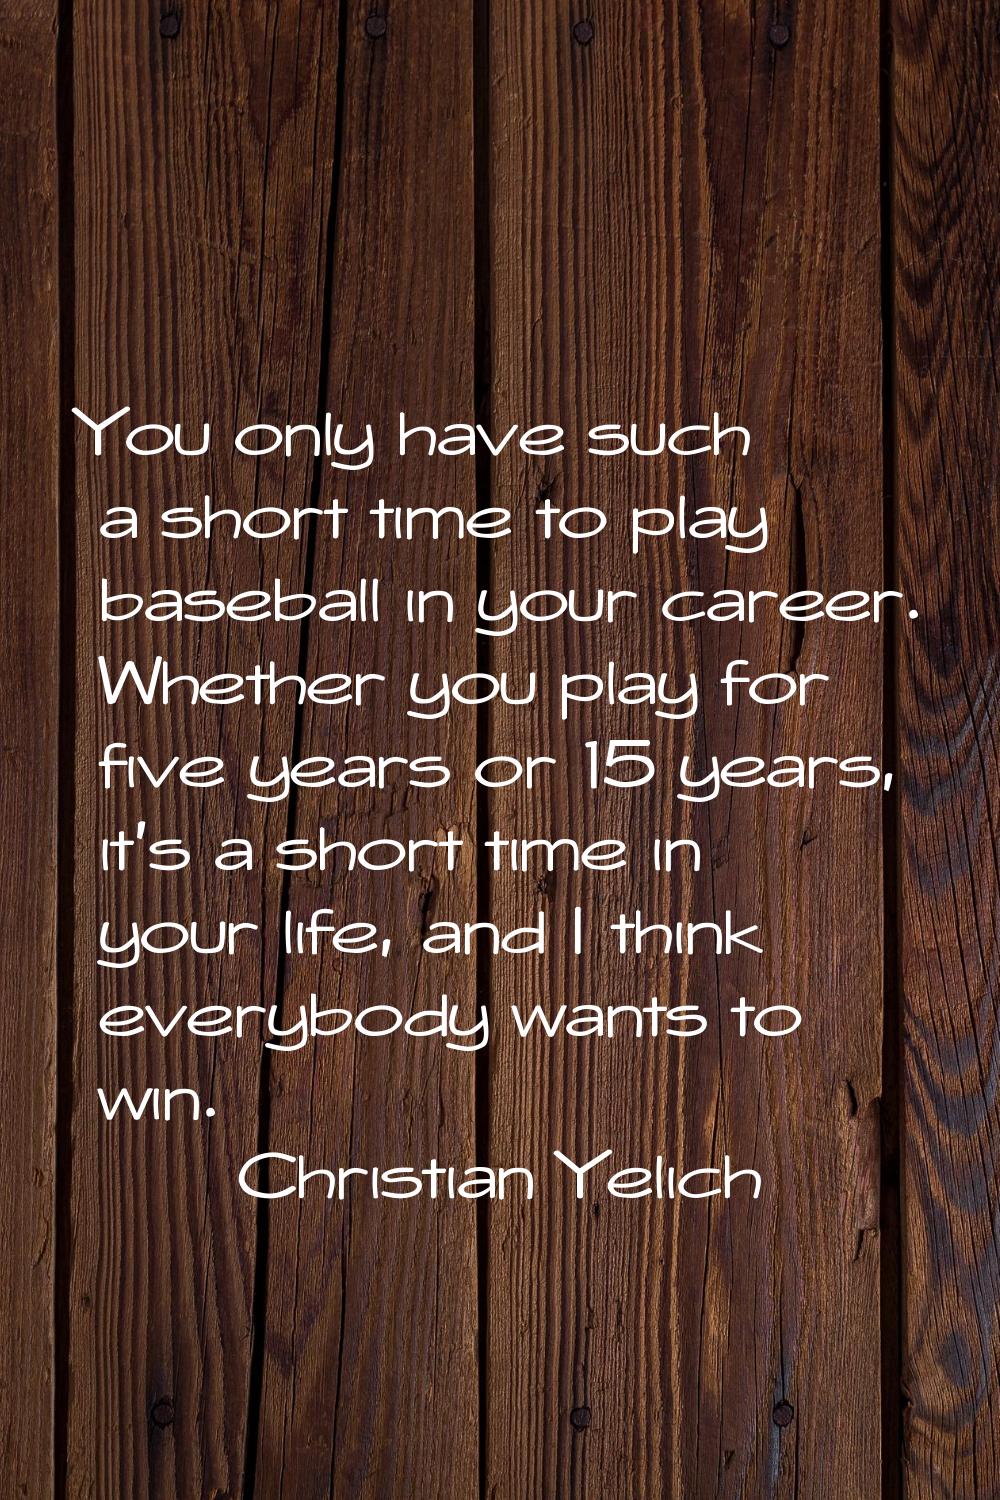 You only have such a short time to play baseball in your career. Whether you play for five years or